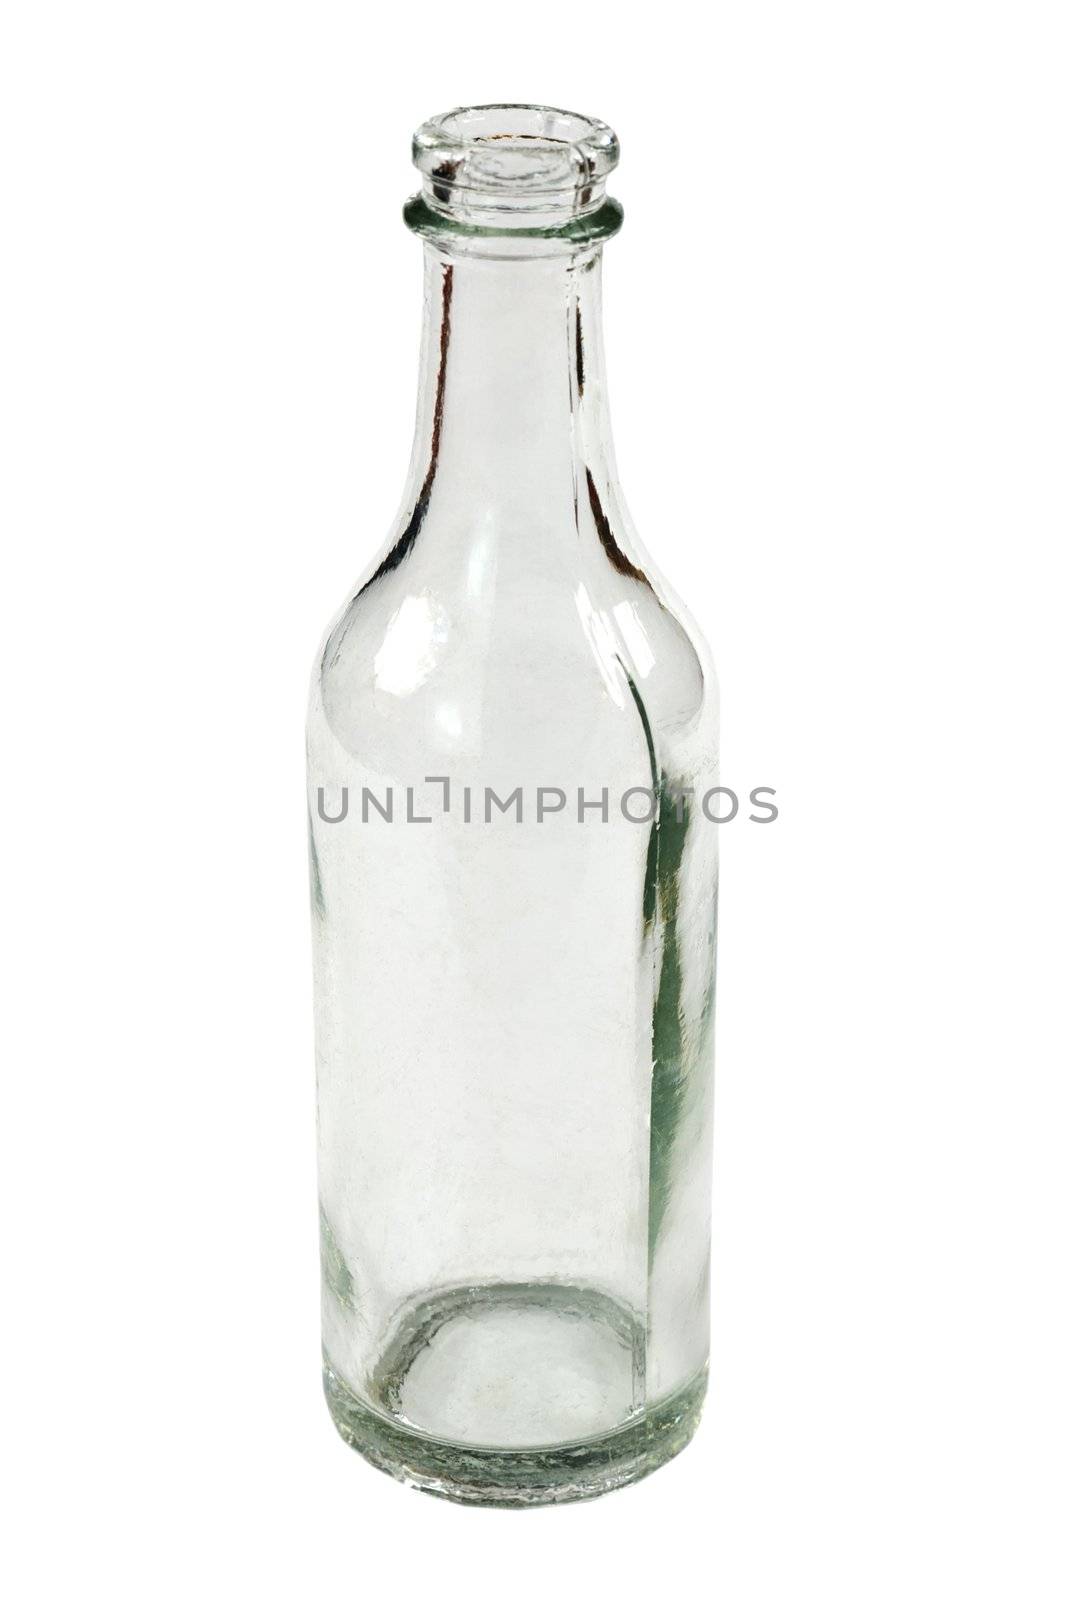 Small old bottle on the white background